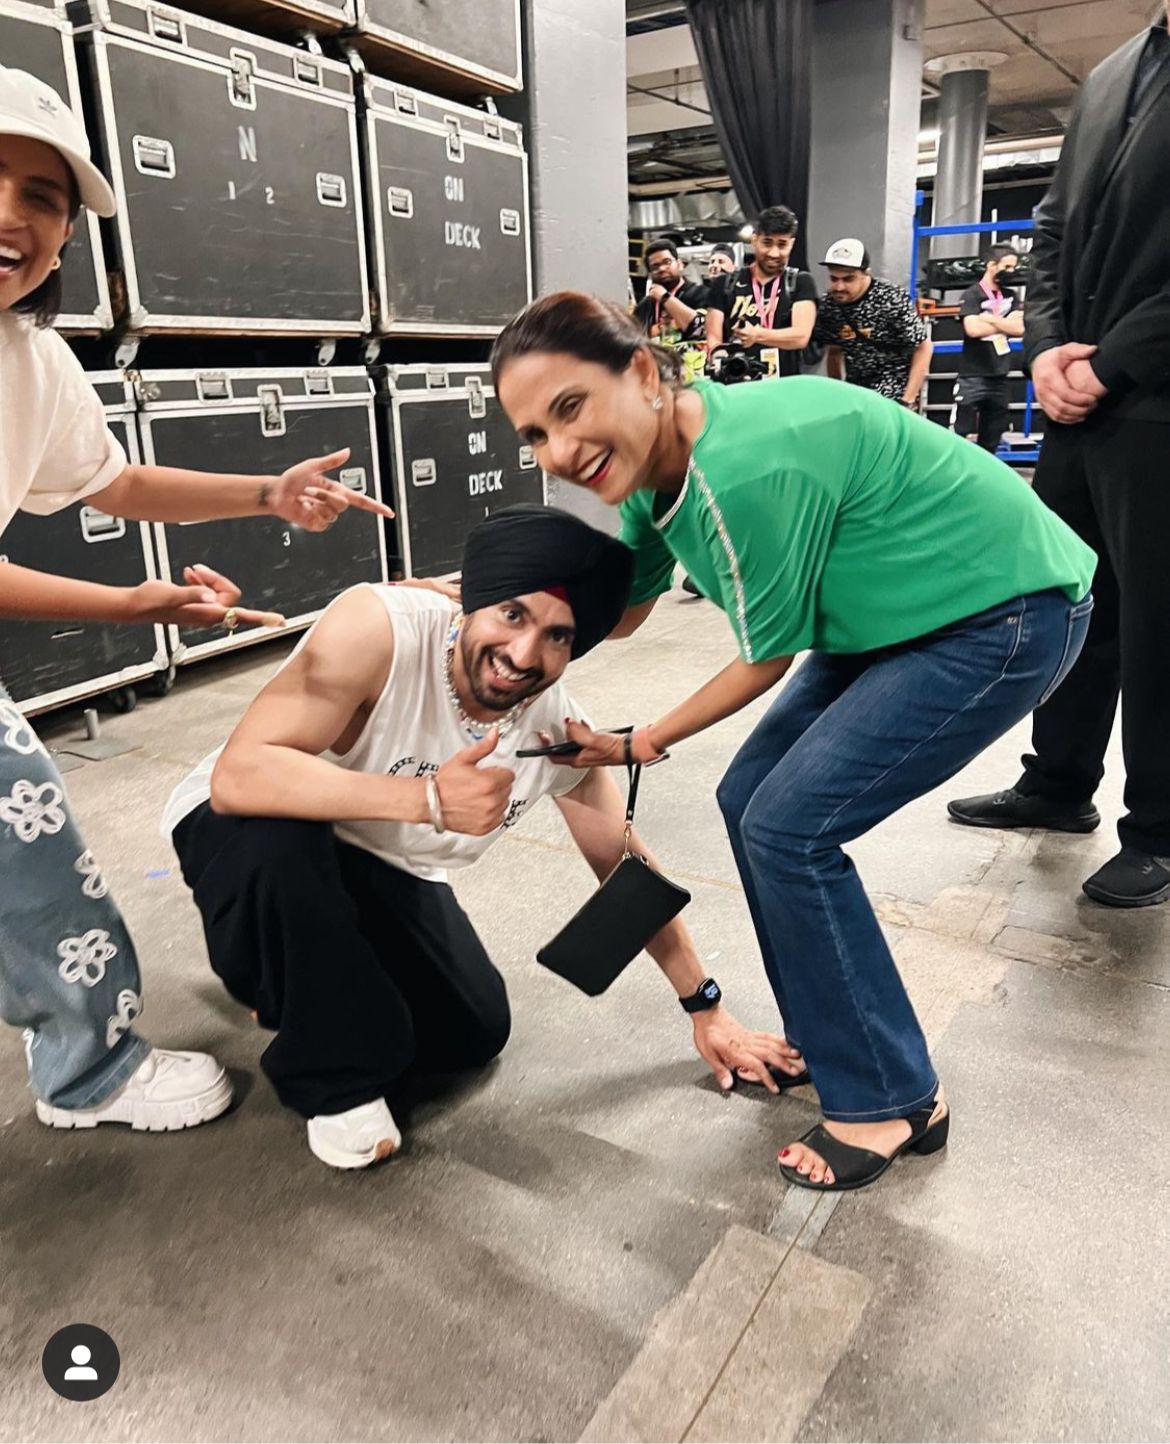 Diljit Dosanjh Pens Adorable Appreciation Post for Comedian Lilly Singh